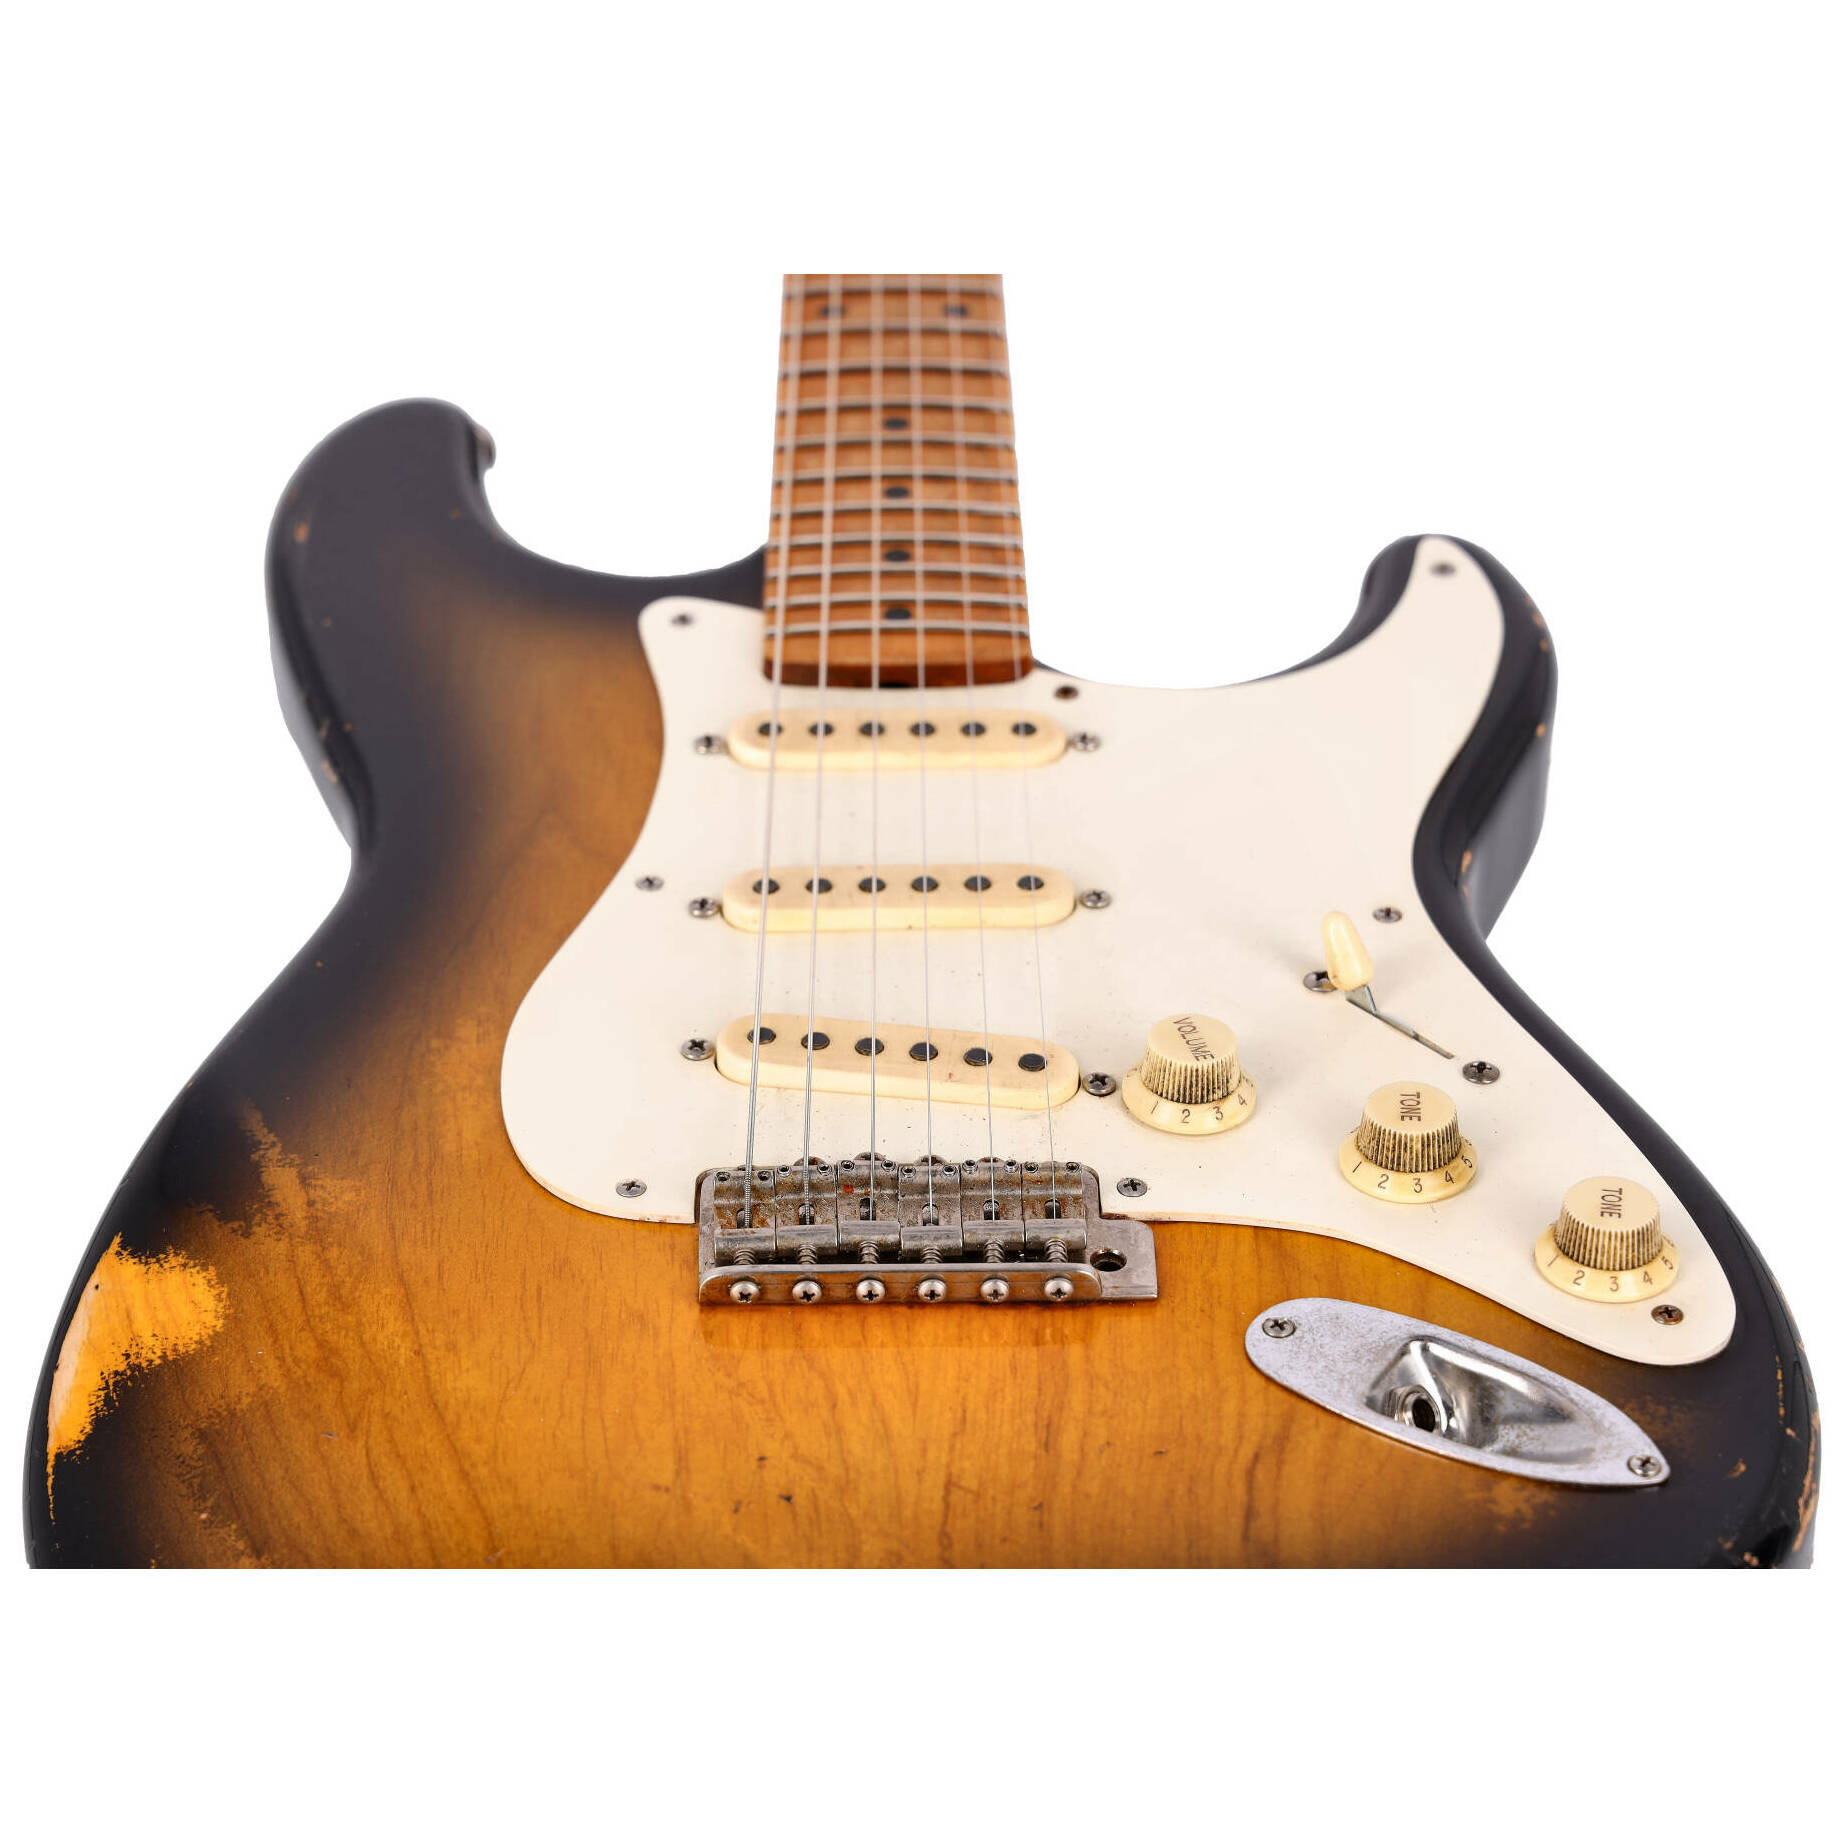 Haar Traditional S Swamp Ash 2-Tone Roasted MPL 4